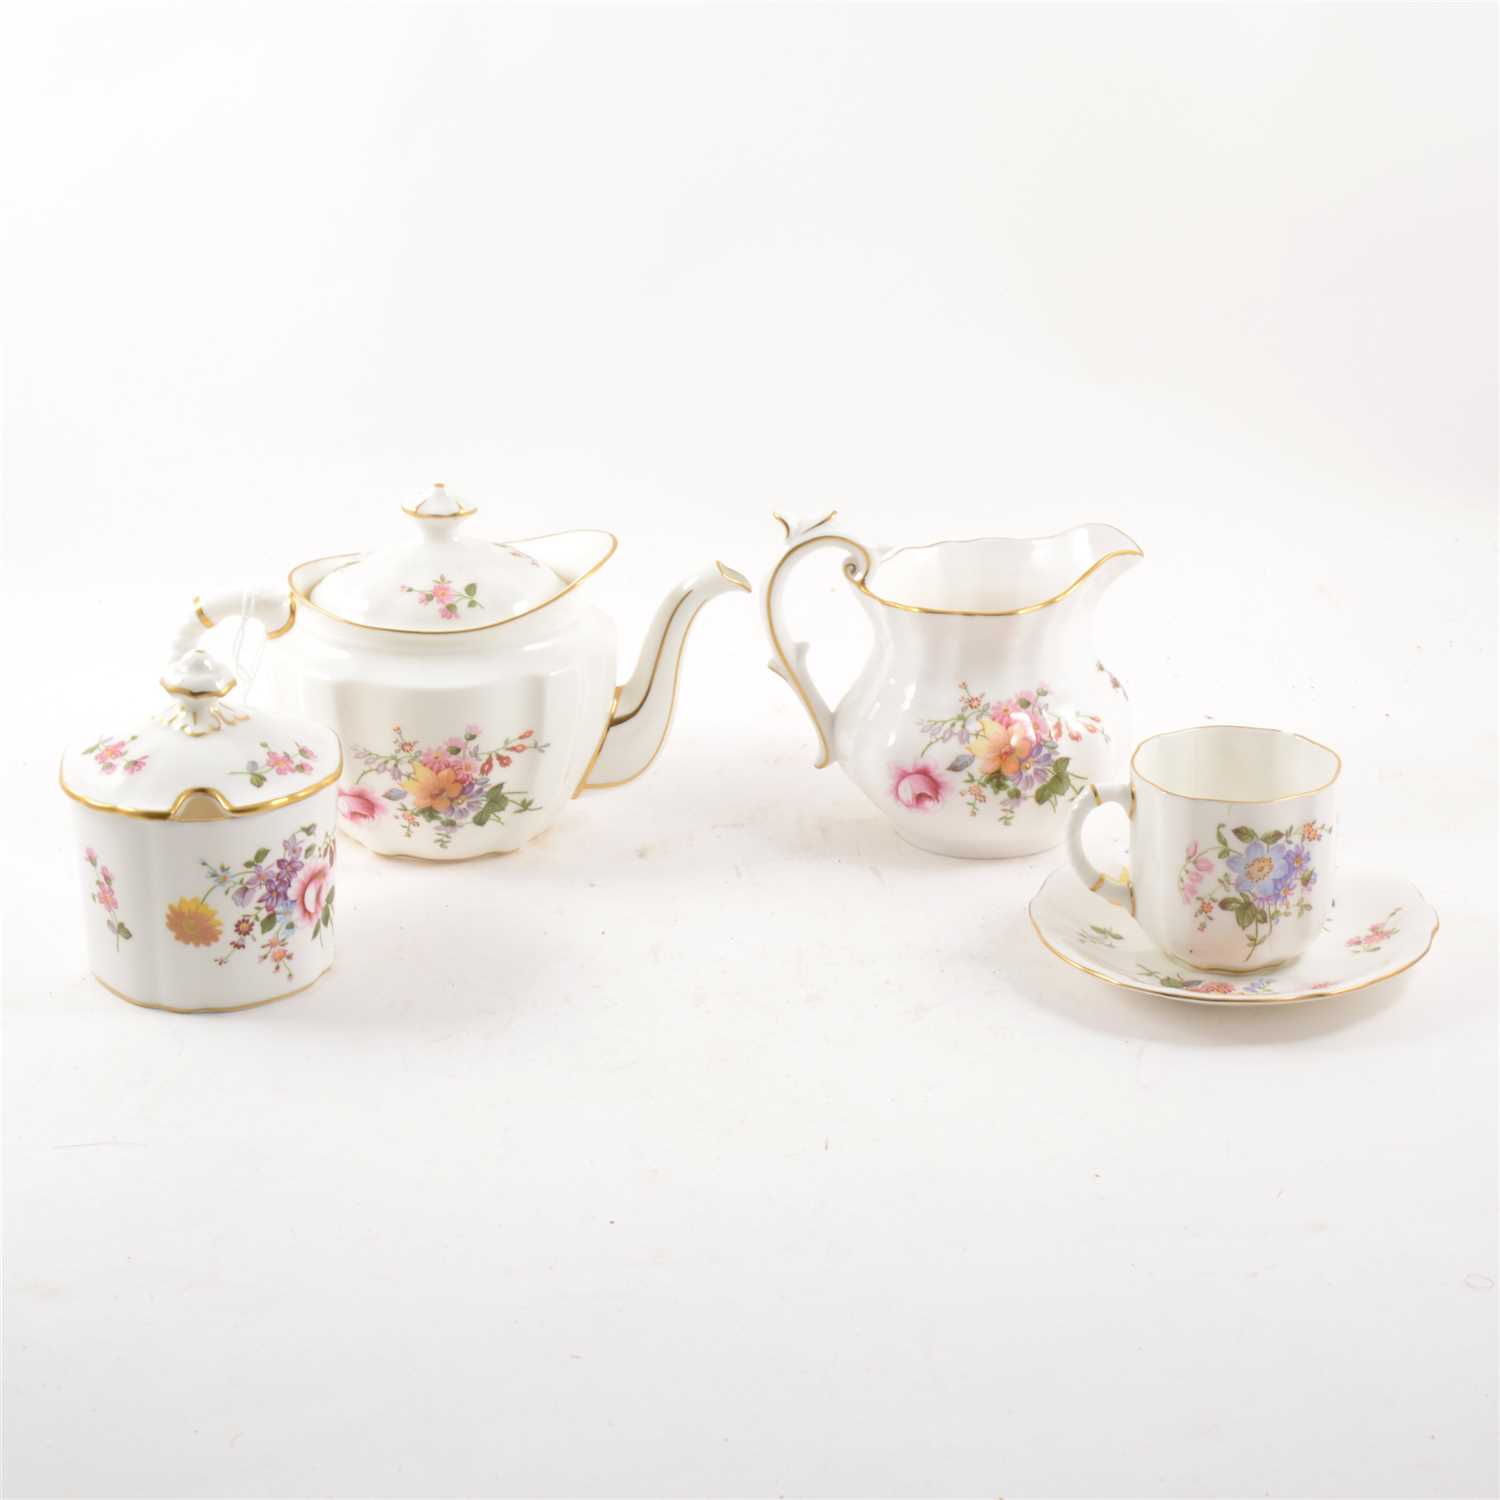 Lot 37 - Royal Crown Derby part teaset, Posies pattern, and other Derby ware